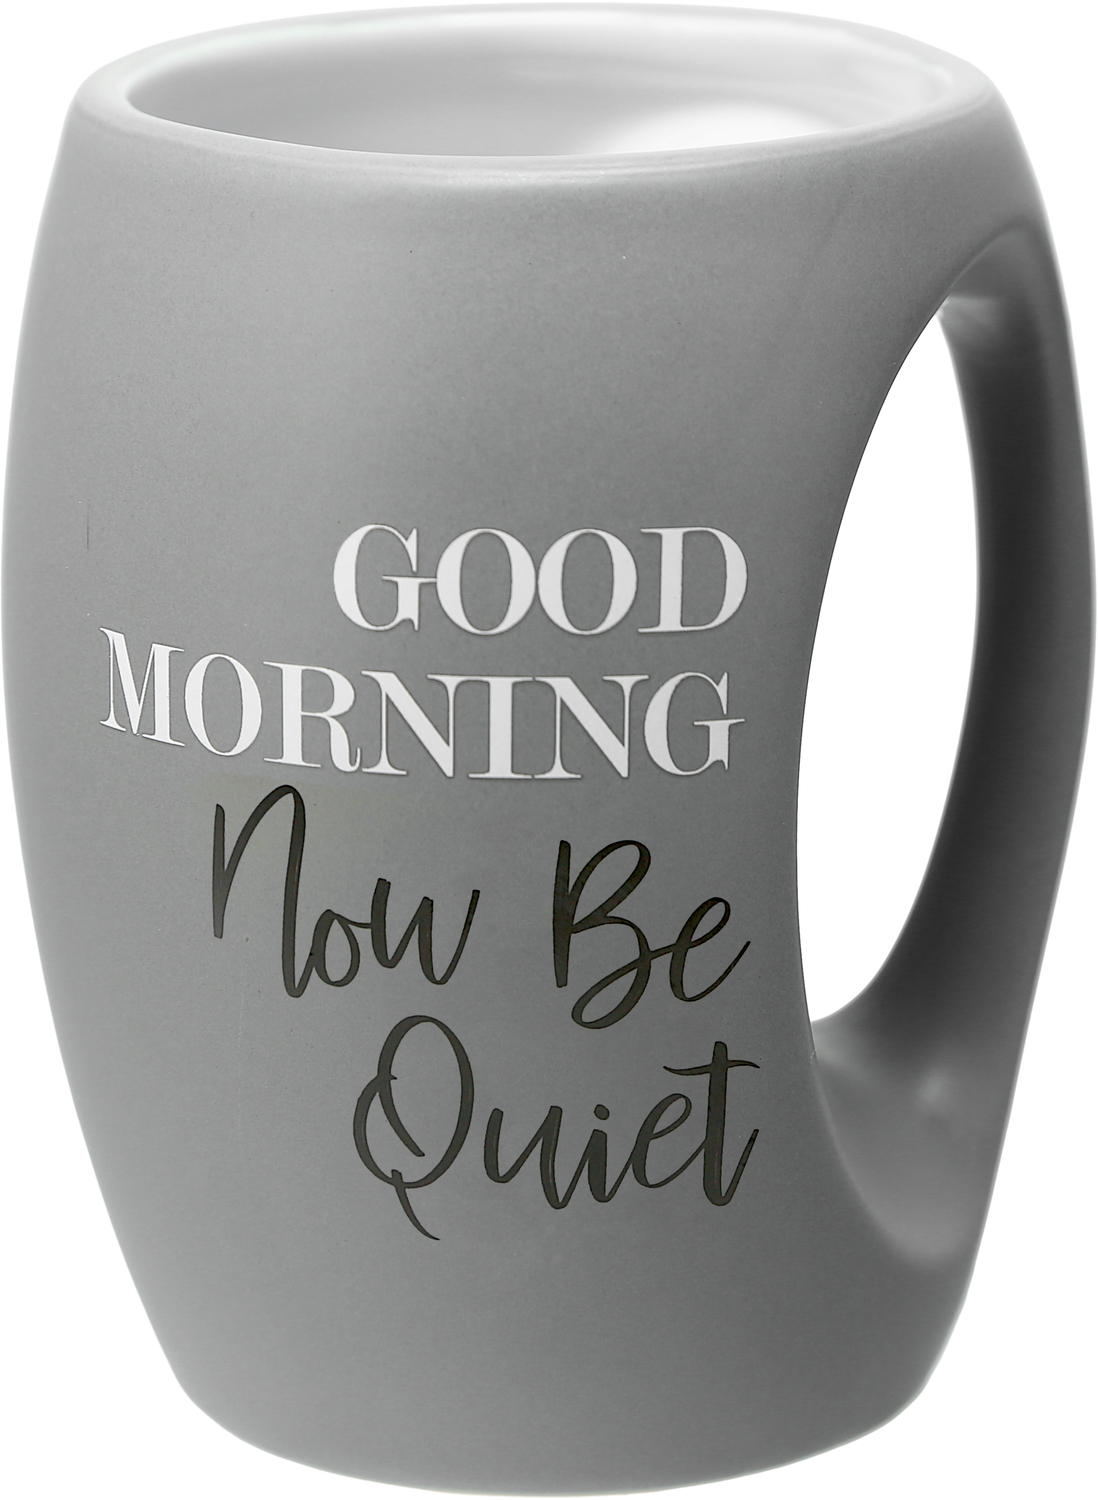 Be Quiet by Good Morning - Be Quiet - 16 oz Cup